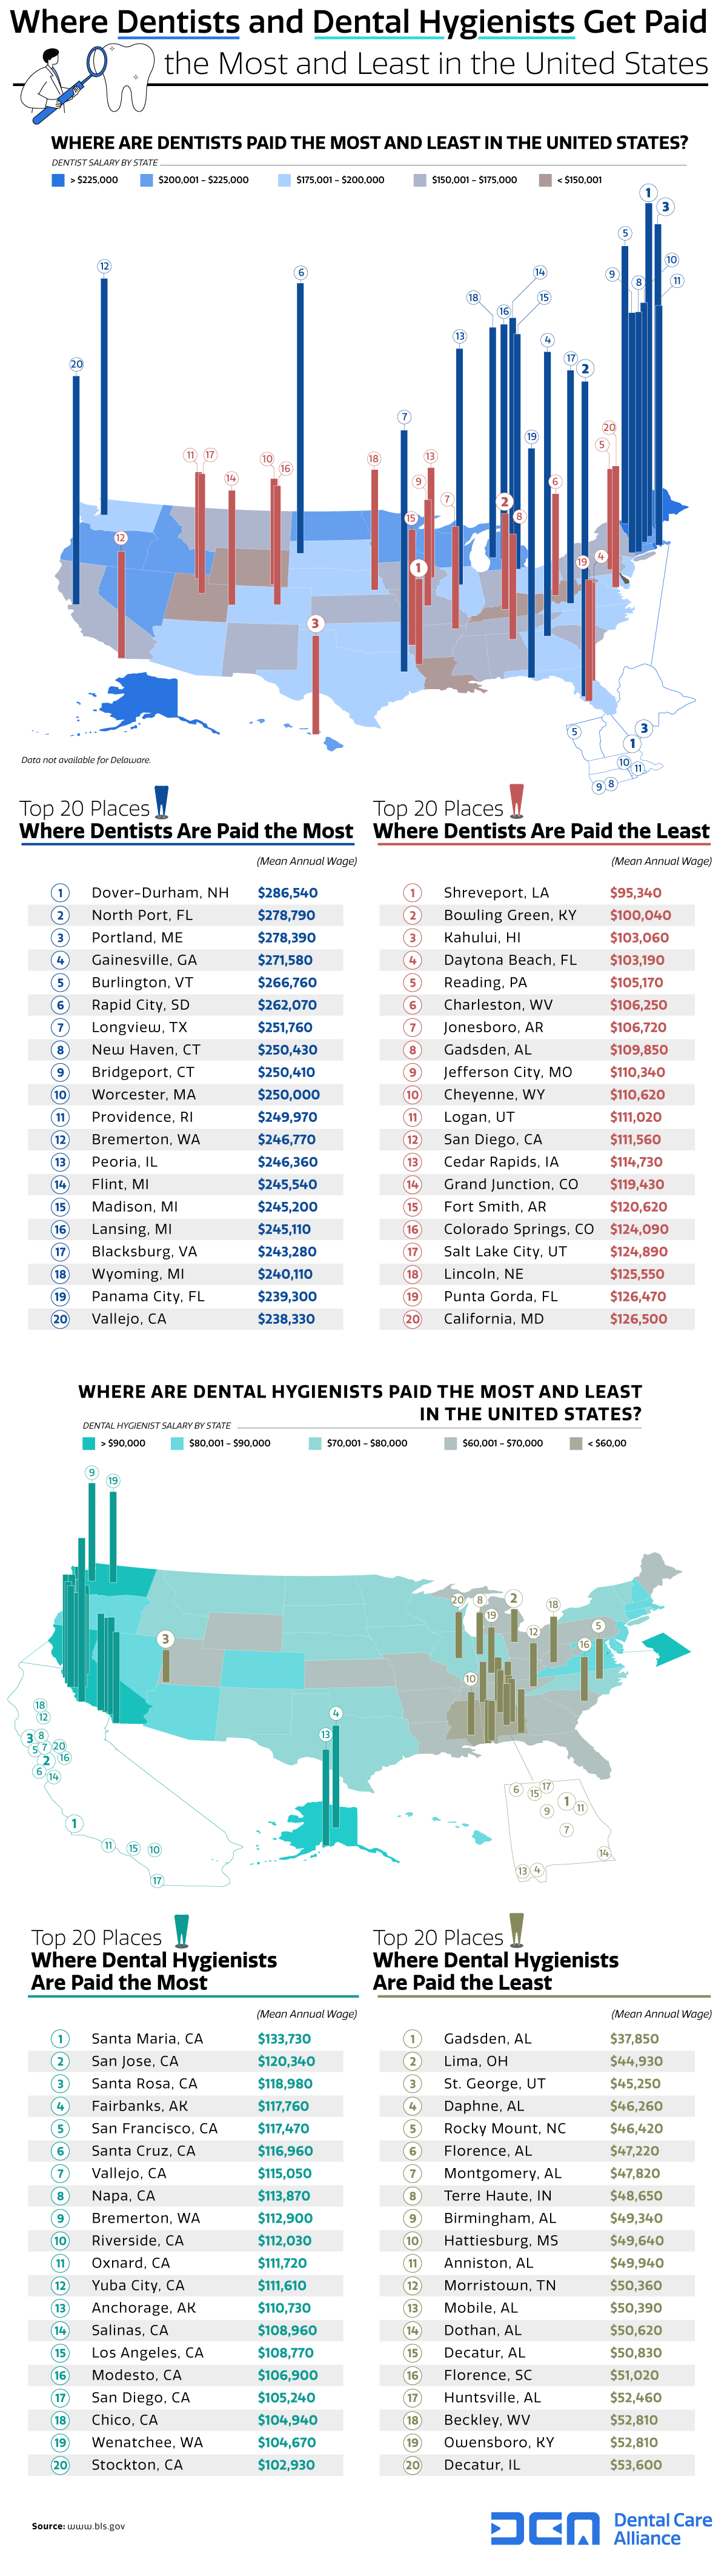 Where Dentists and Dental Hygienists Get Paid the Most and Least in the United States - Dental Care Alliance Dental Support Organization - Infographic